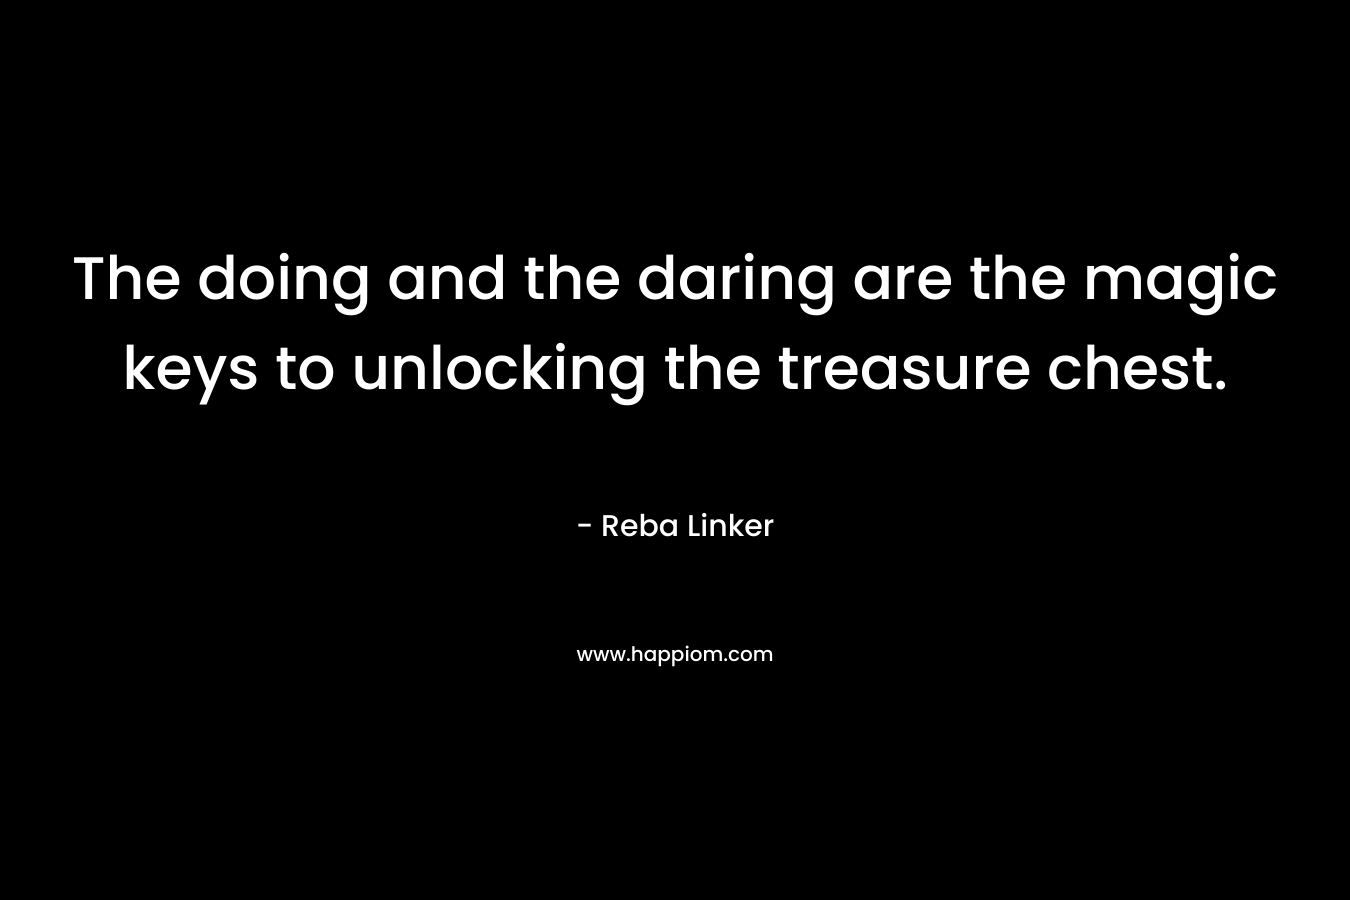 The doing and the daring are the magic keys to unlocking the treasure chest.